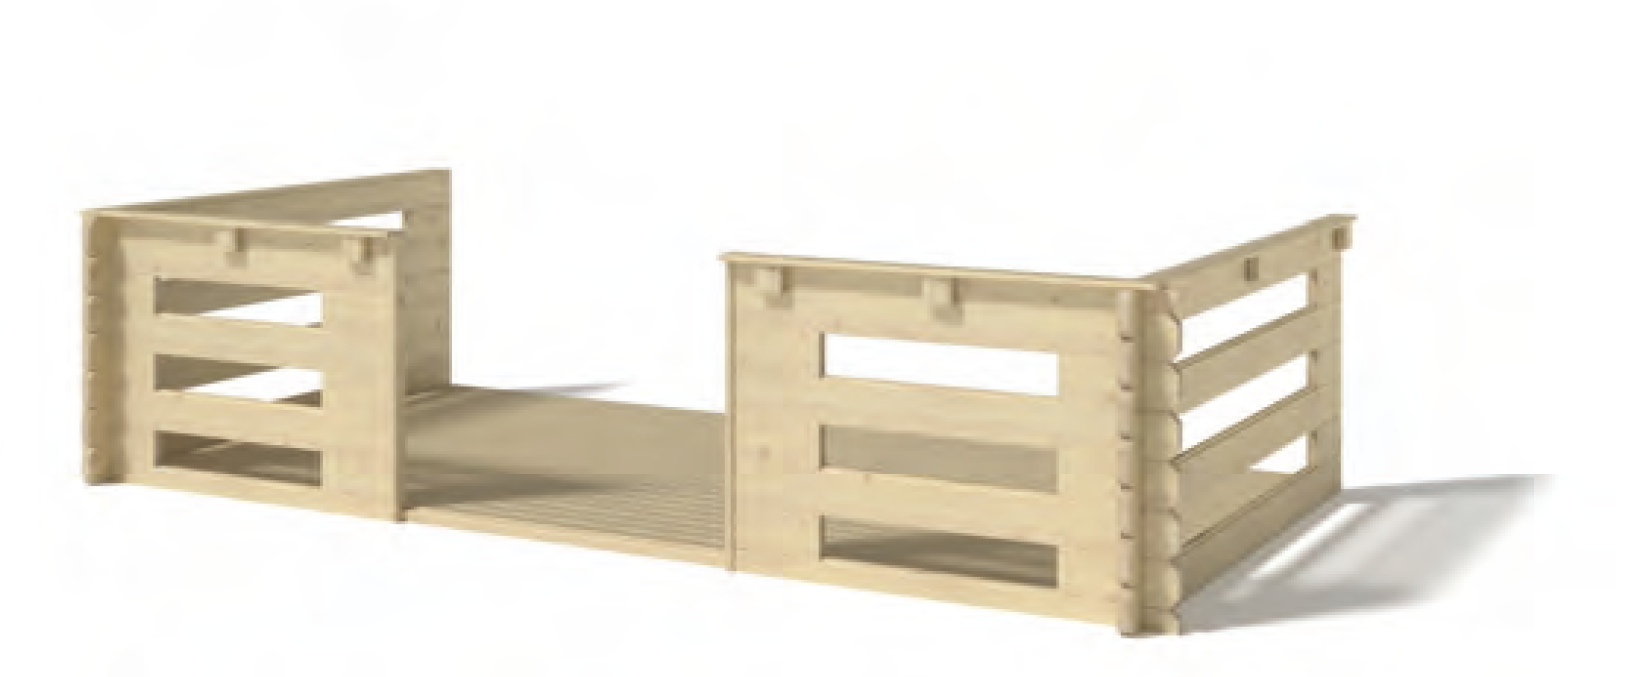 Bratislava roof and balcony for shelter in wood 400 x 200 cm